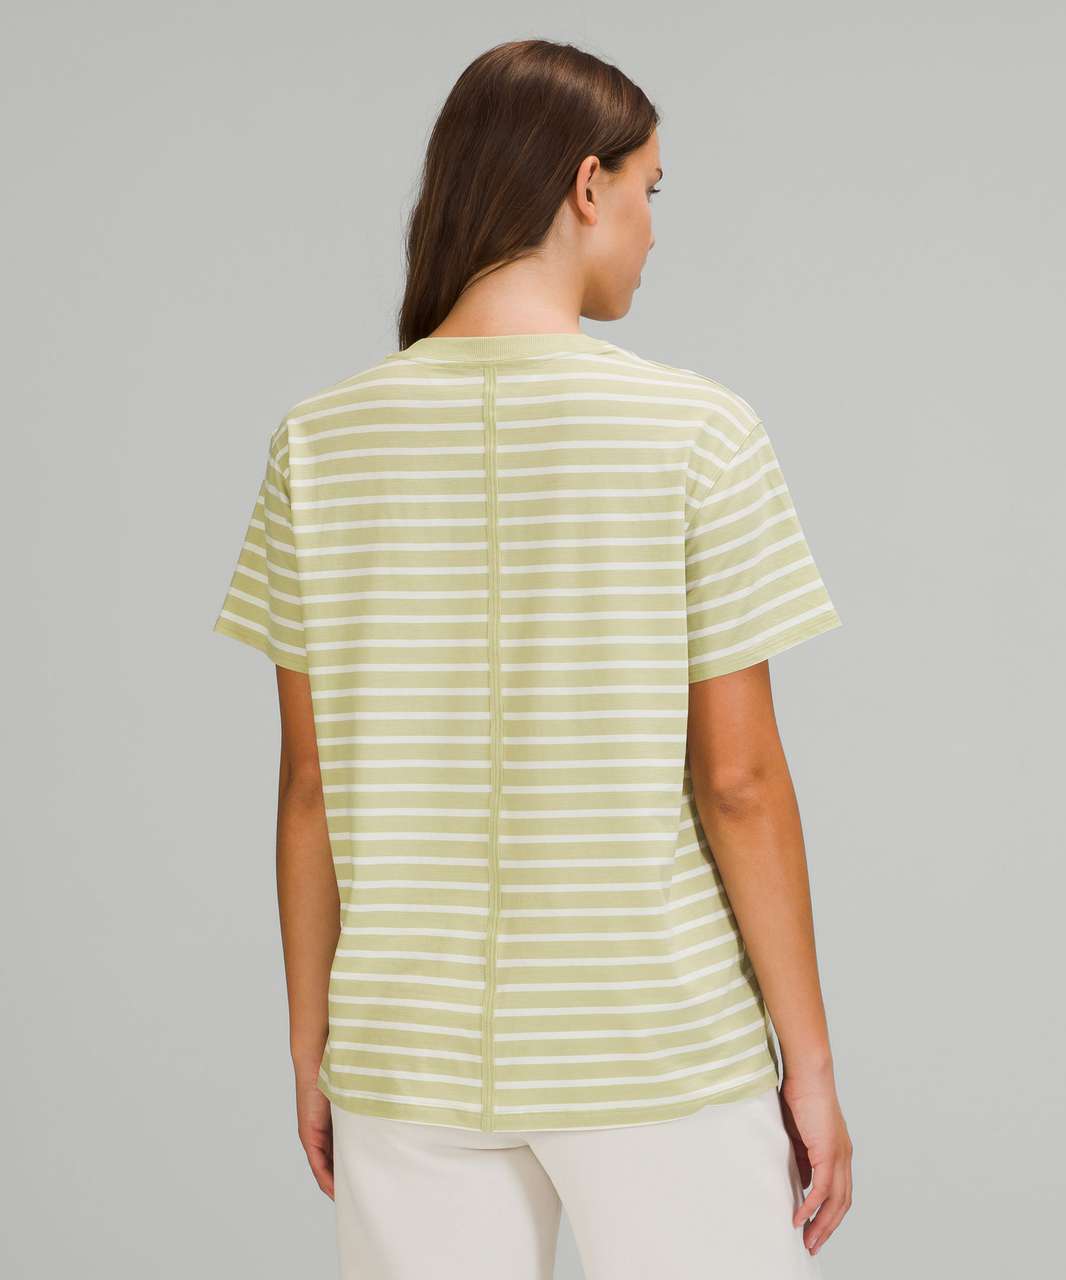 Lululemon All Yours Tee - Yachtie Stripe Dew Green White